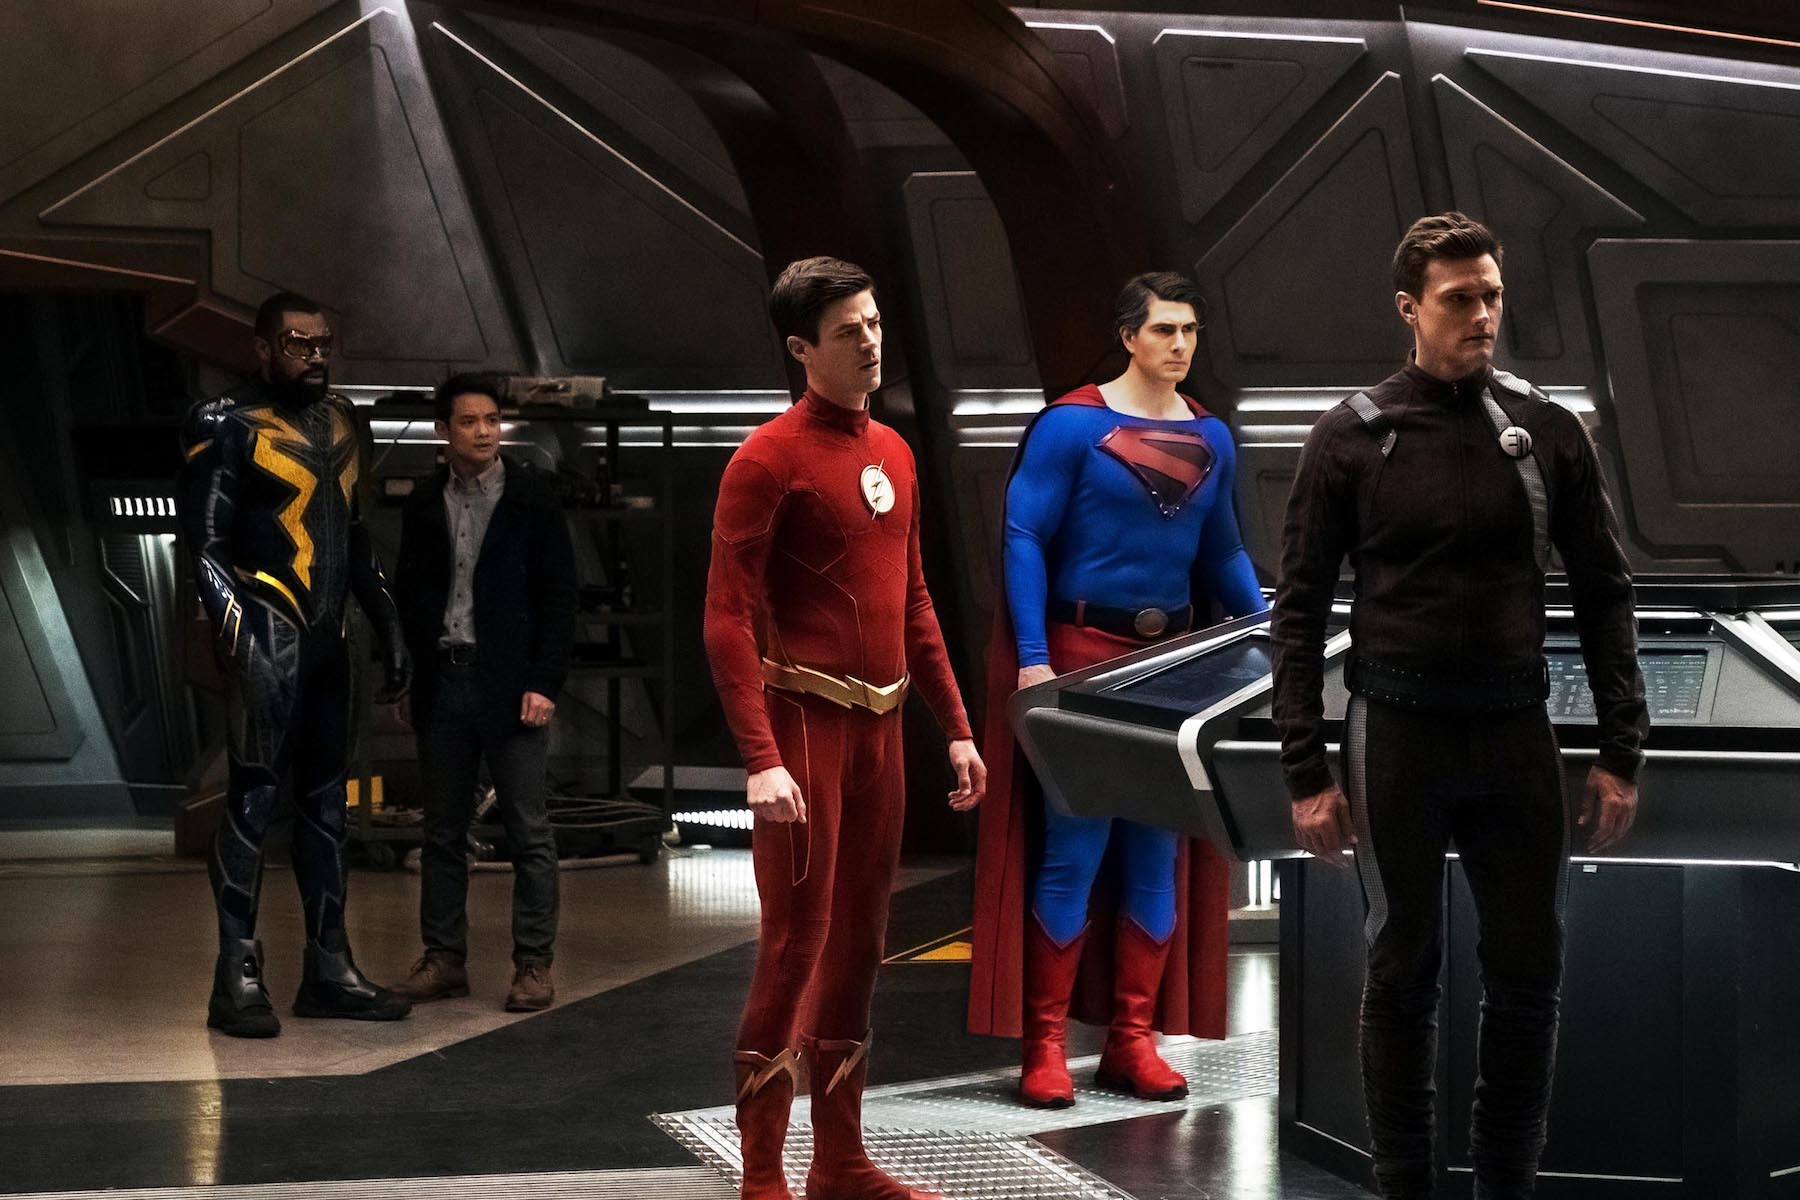 Cress Williams as Black Lightning, Osric Chau as Ryan Choi, Grant Gustin as Barry Allen/The Flash, Brandon Routh as Superman and Hartley Sawyer as Dibney/Elongated Man